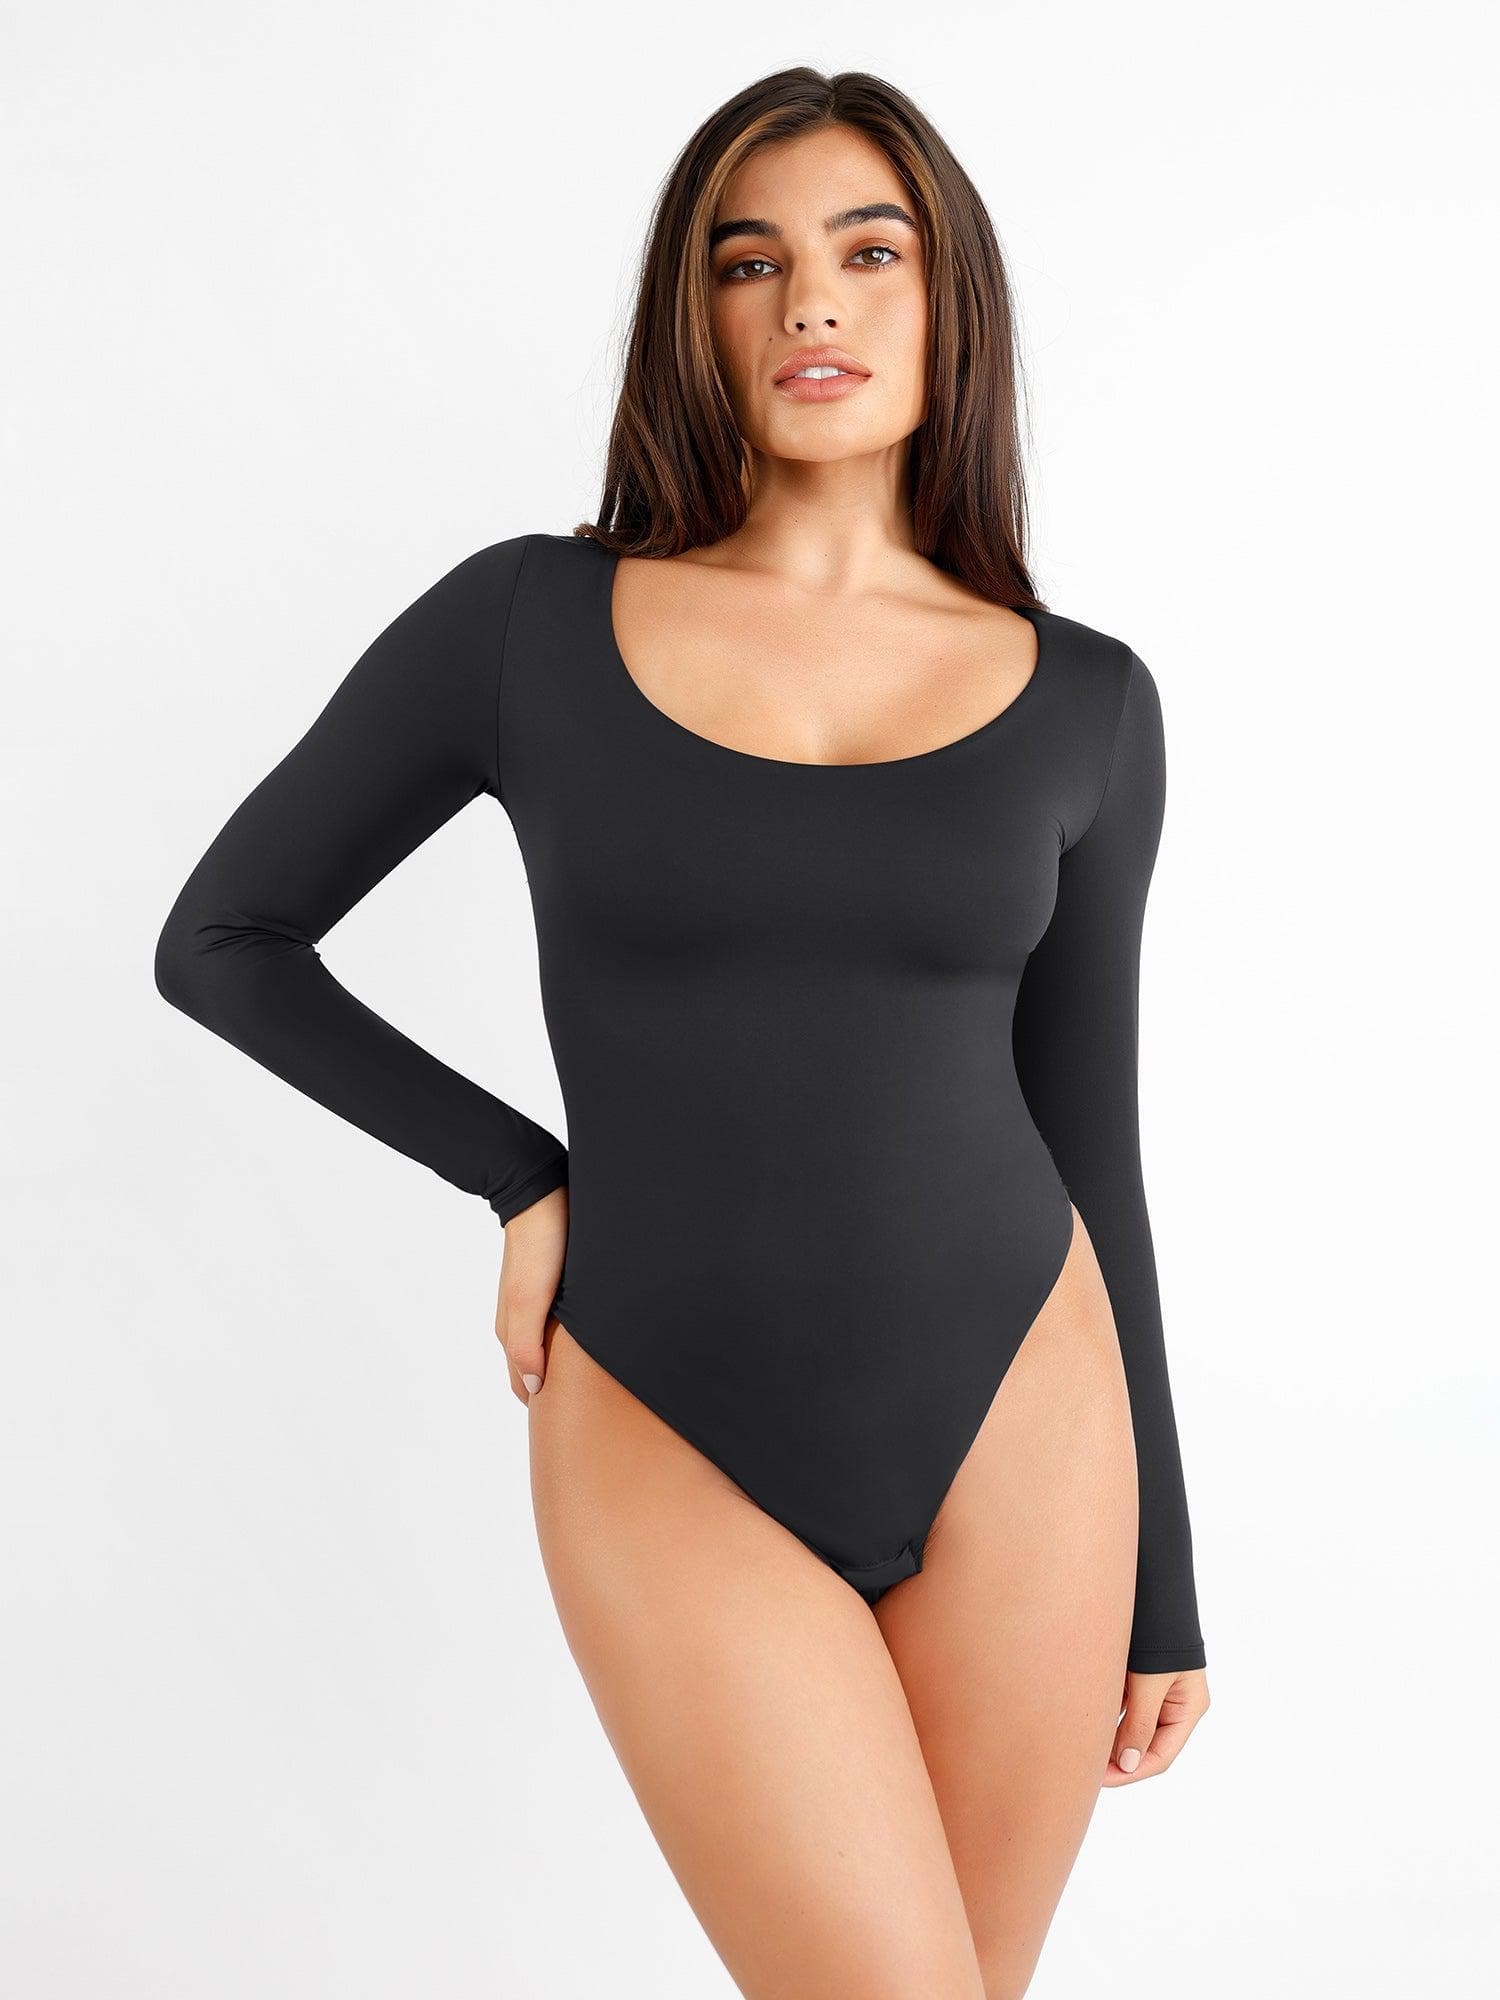 IN'VOLAND Womens Plus Size Bodysuit Long Sleeve Stretchy Leotard Scoop Neck  Top Tees at  Women's Clothing store